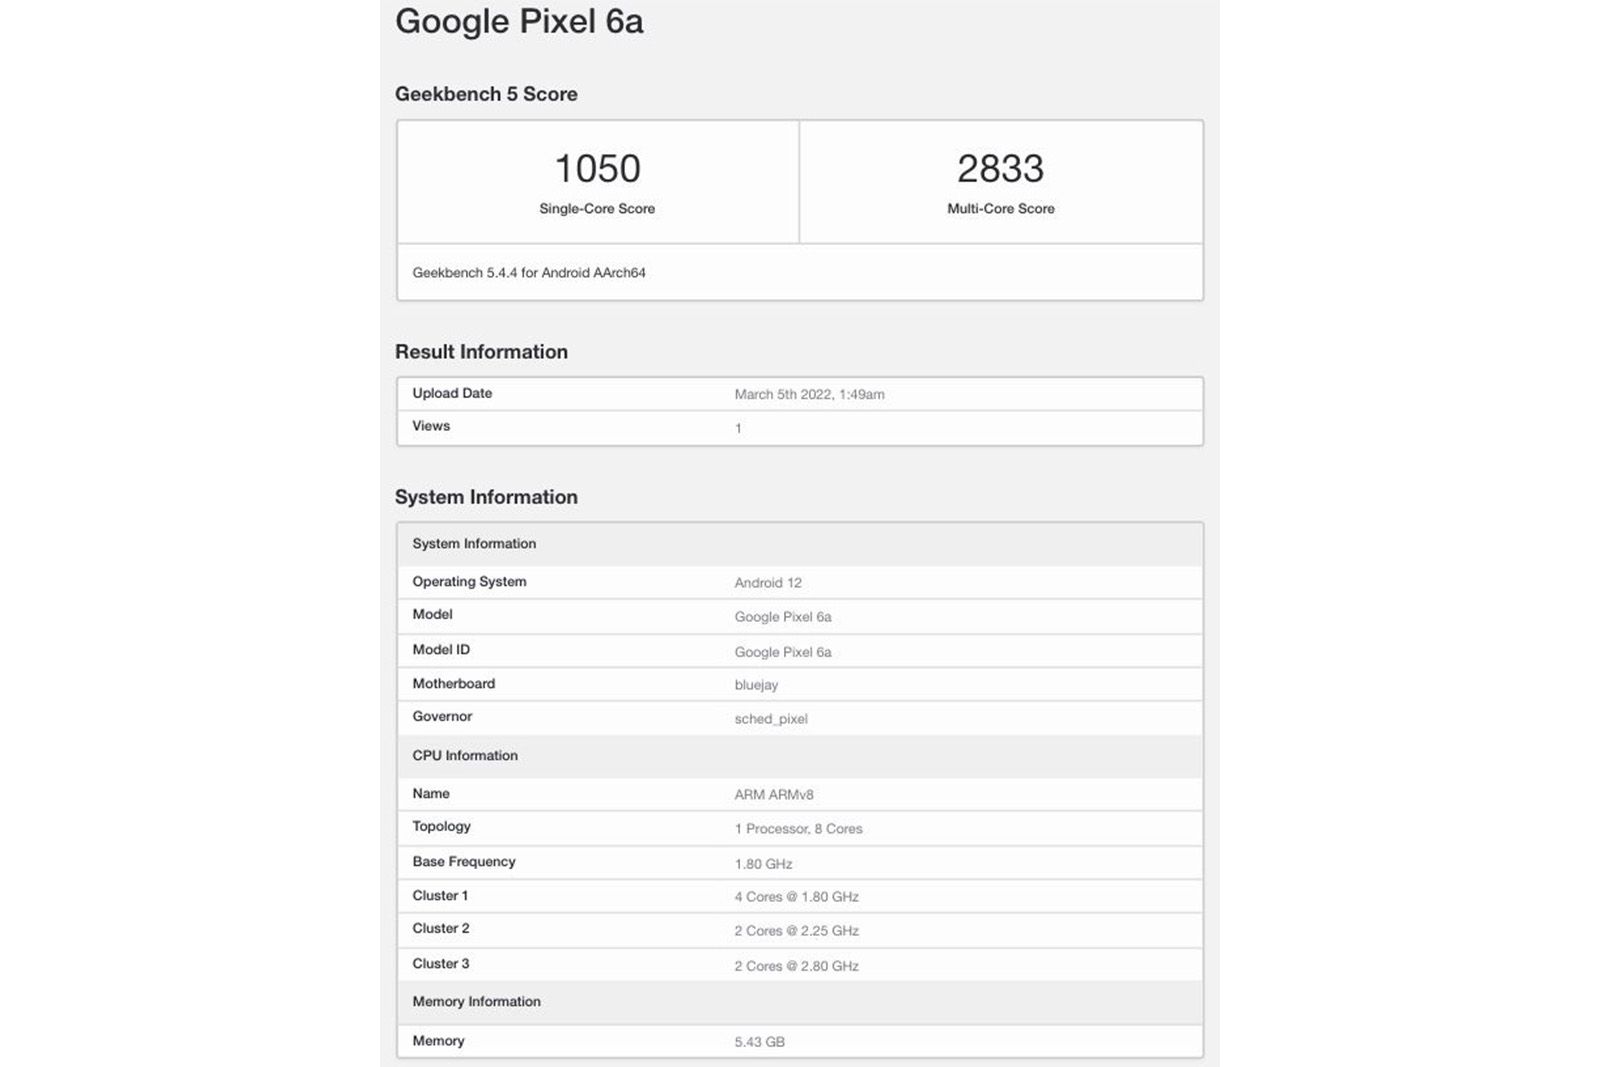 Google Pixel 6a specs listed on Geekbench photo 2